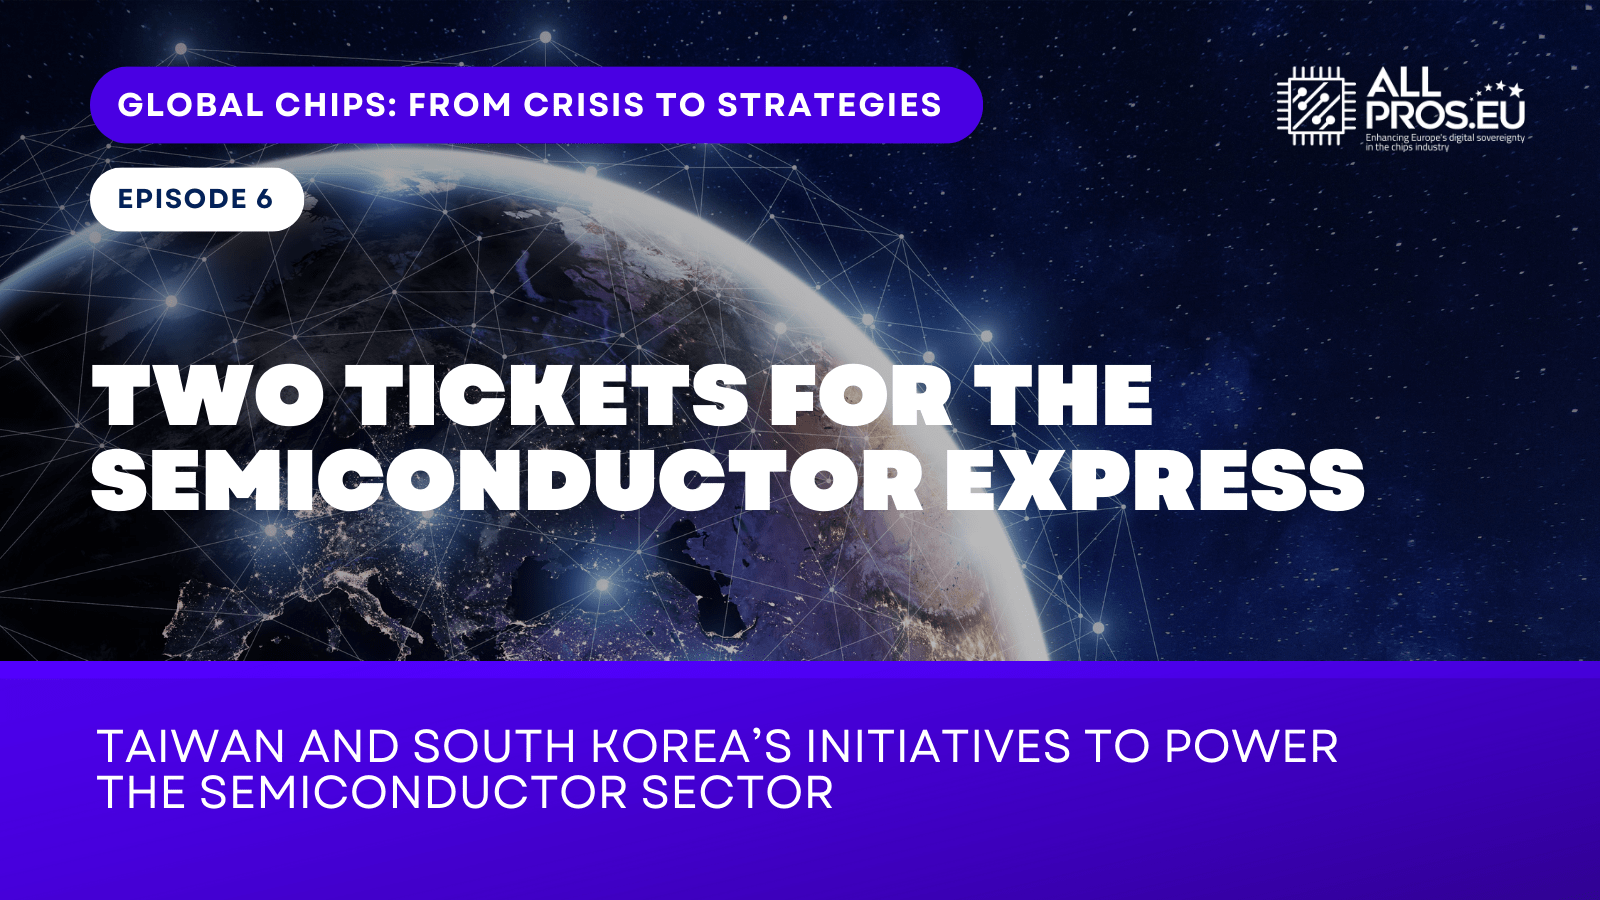 Two tickets for the Semiconductor Express: Taiwan and South Korea’s initiatives to power the semiconductor sector